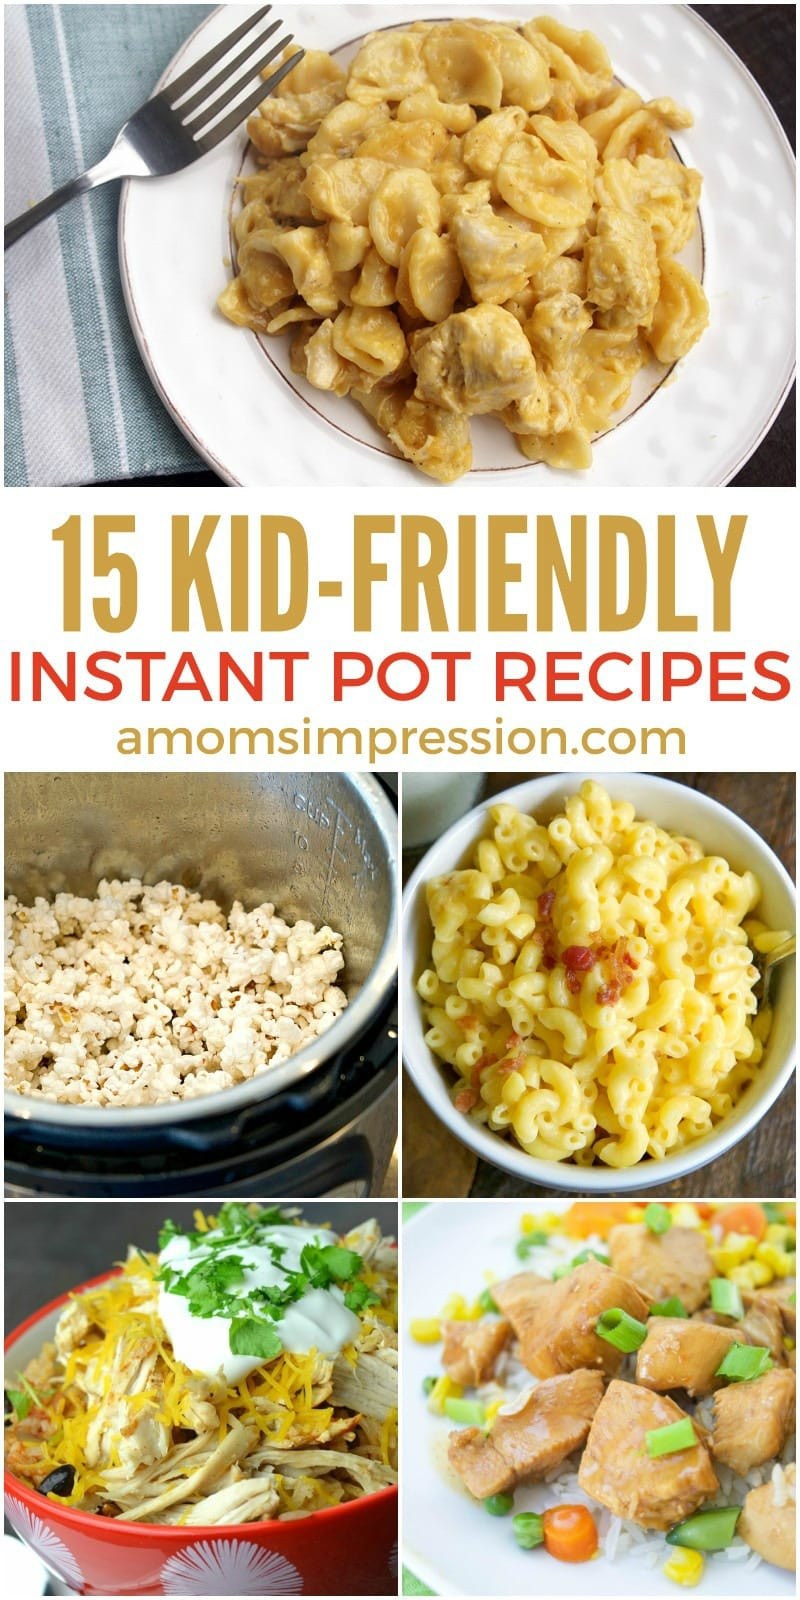 Easy Kid Friendly Dinner Recipes
 15 Quick and Easy Kid Friendly Instant Pot Recipes